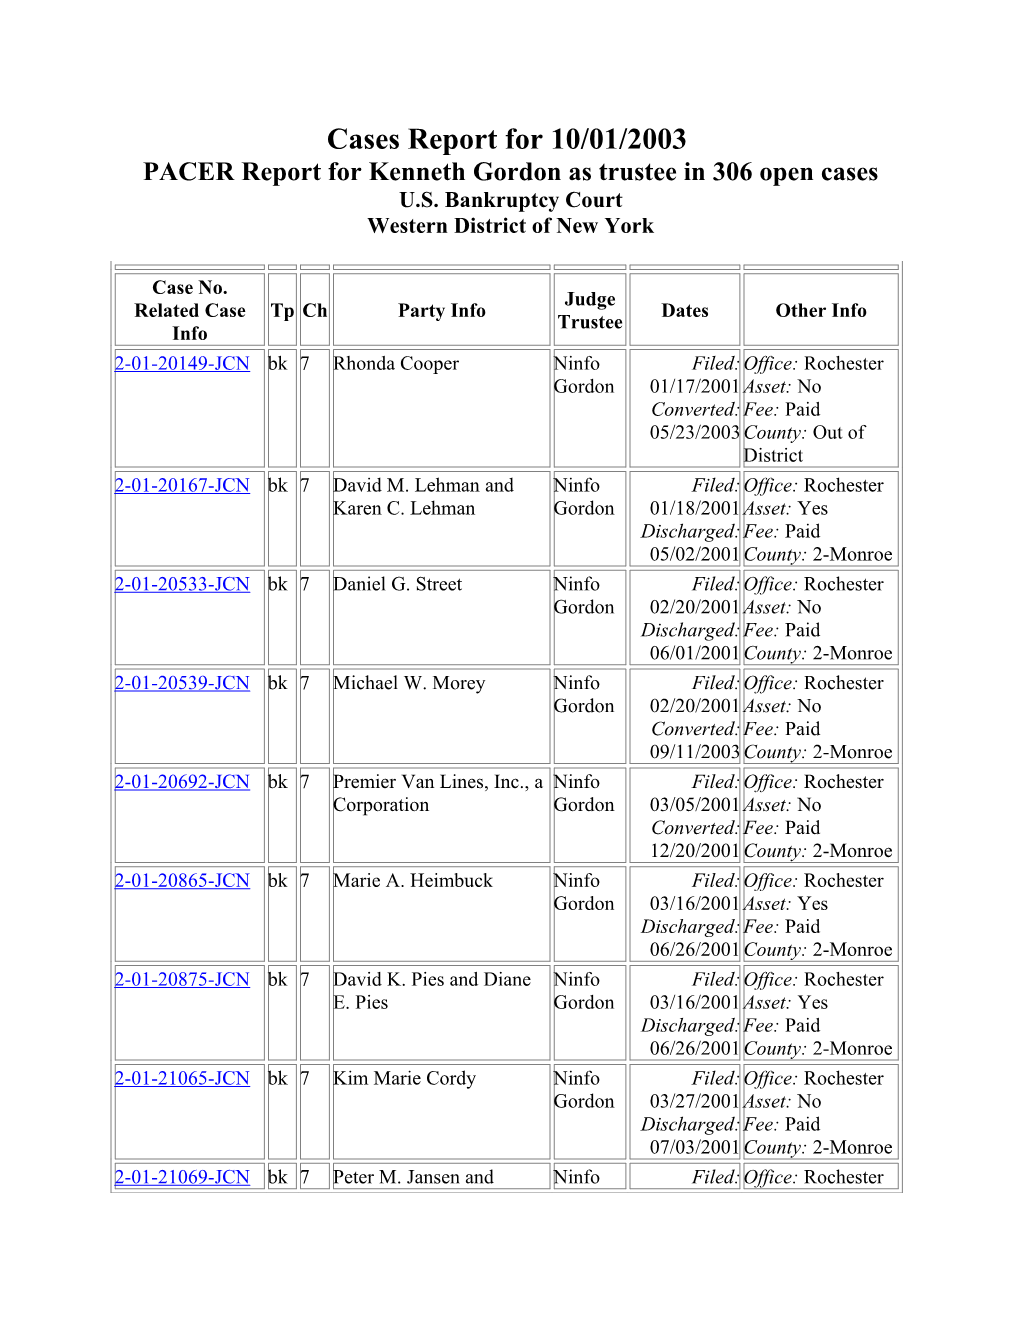 PACER Report for Kenneth Gordon As Trustee in 306 Open Cases